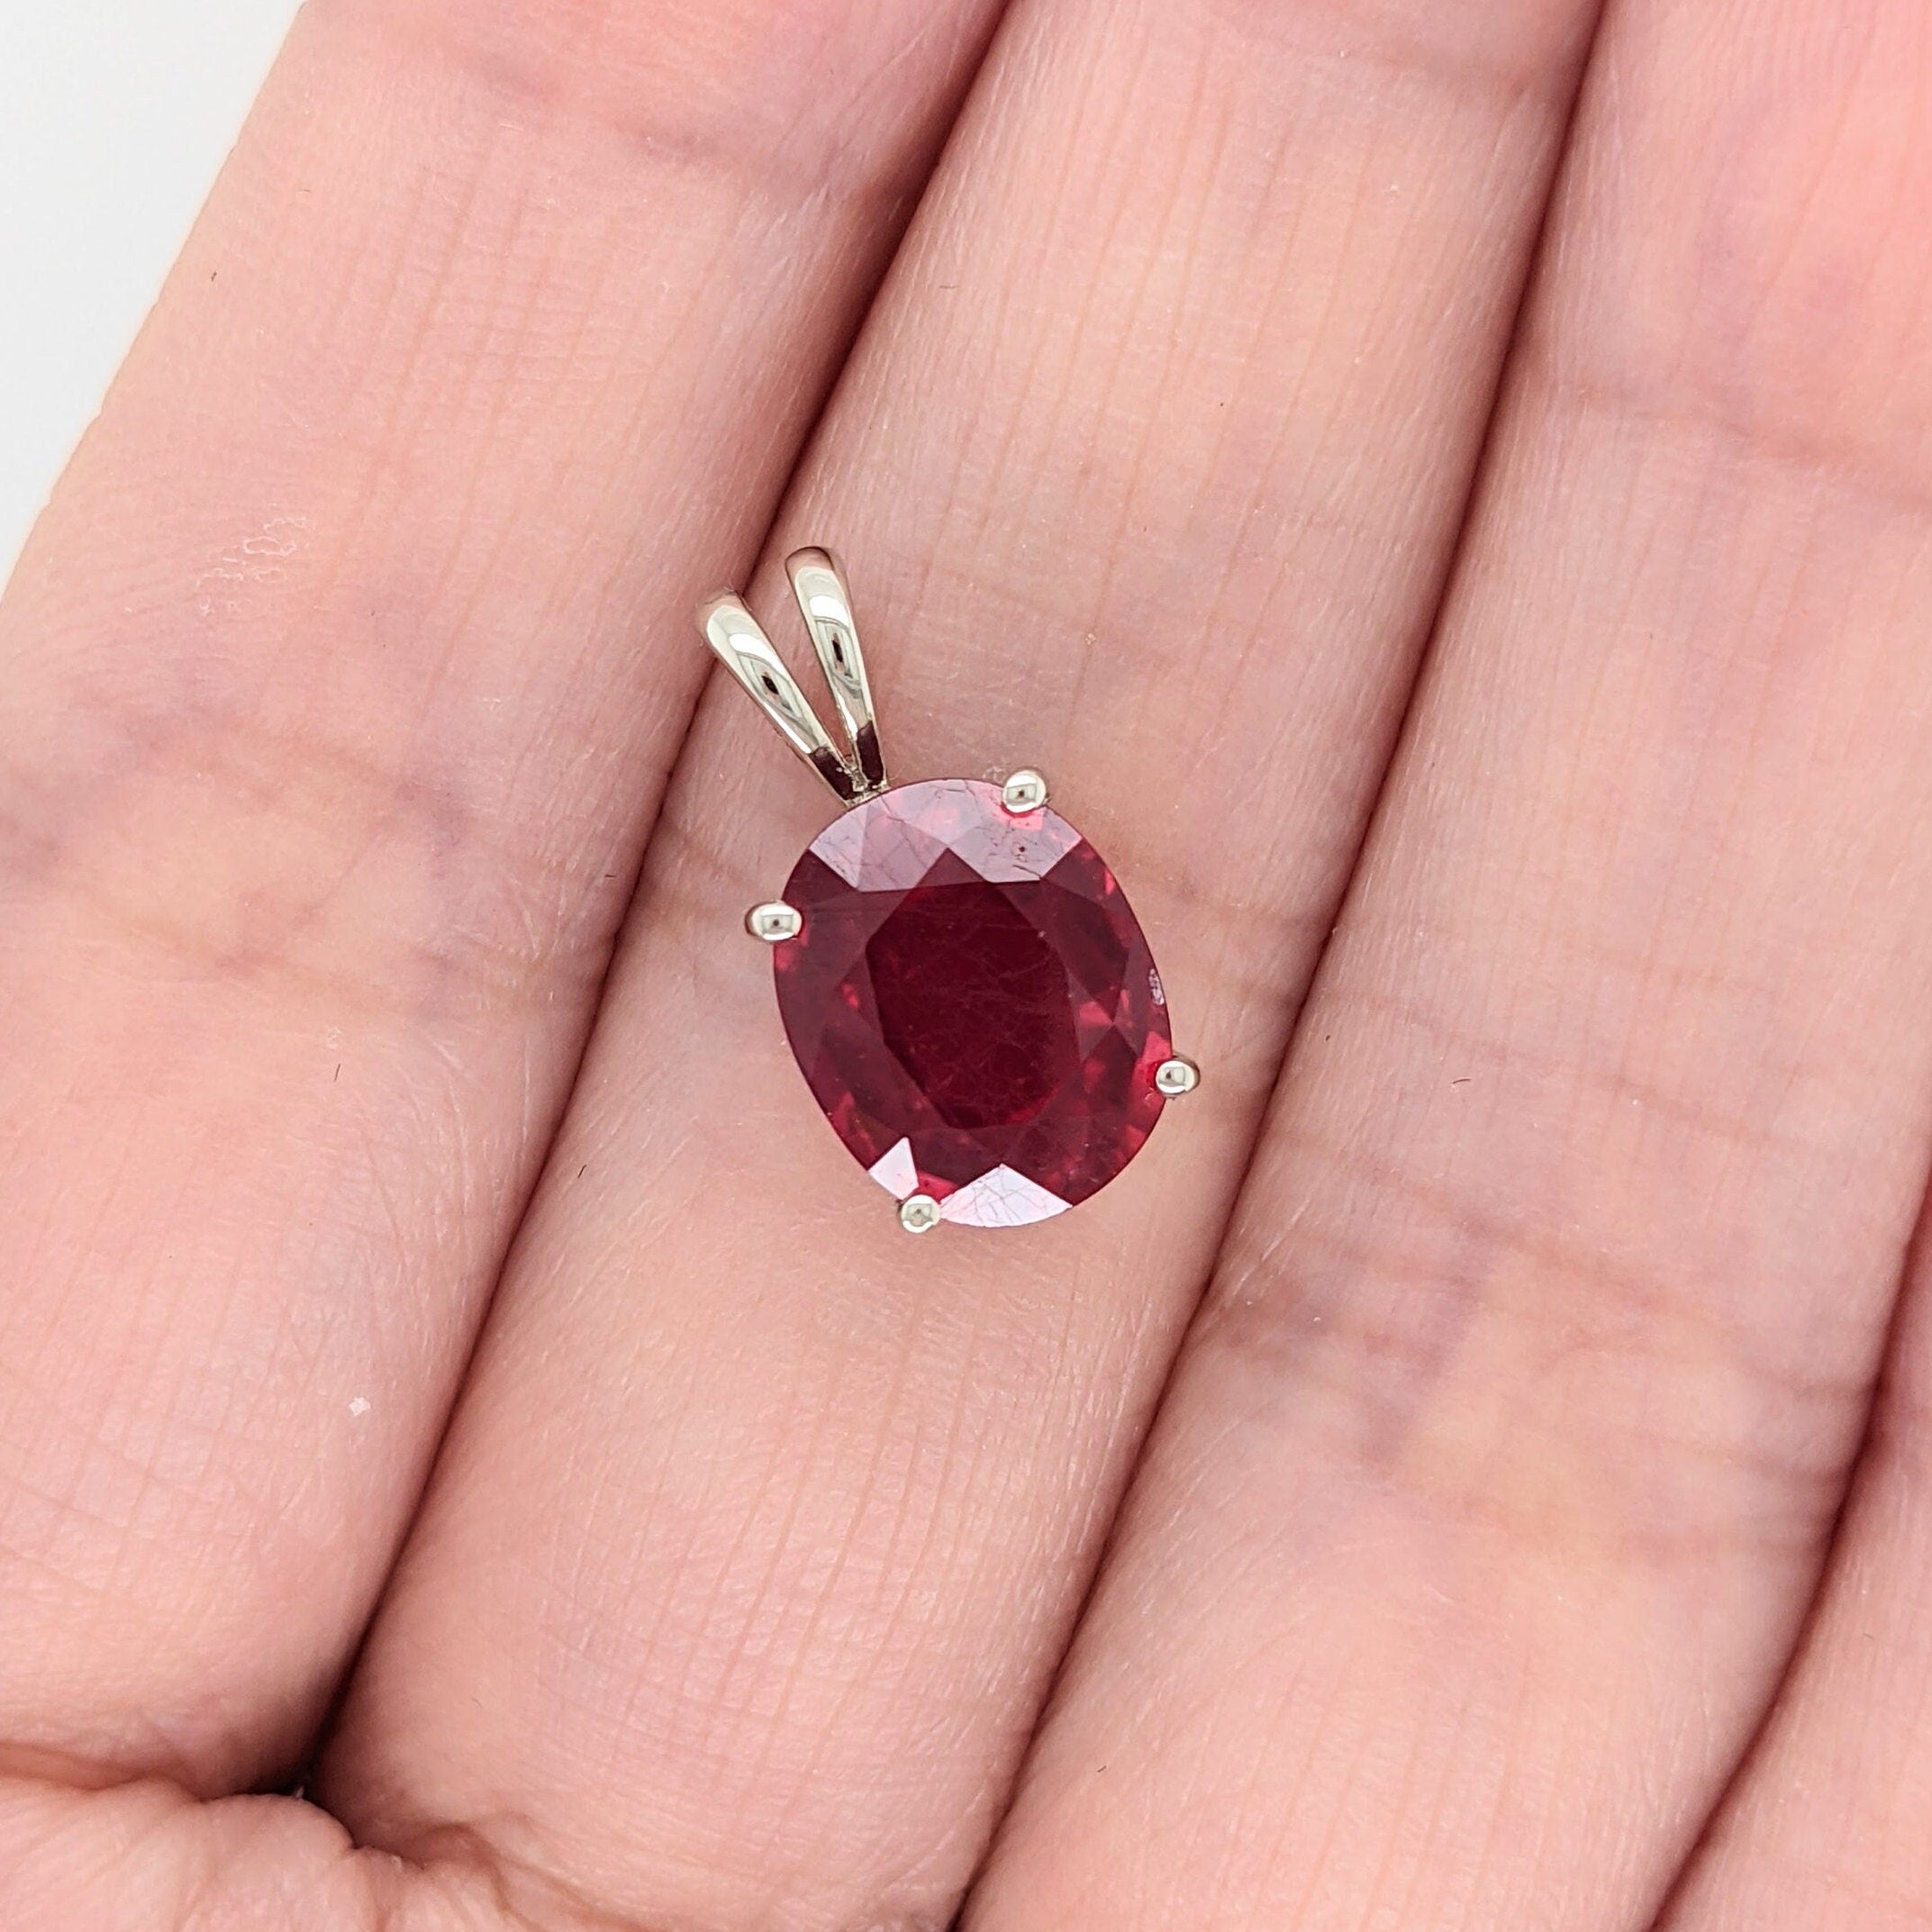 Pendants-Classy Pigeon Blood Red Ruby Pendant in Solid 14K White, Yellow or Rose Gold | Oval 10x8mm | July Birthstone | Rabbit Ear Bail | Prong Set - NNJGemstones